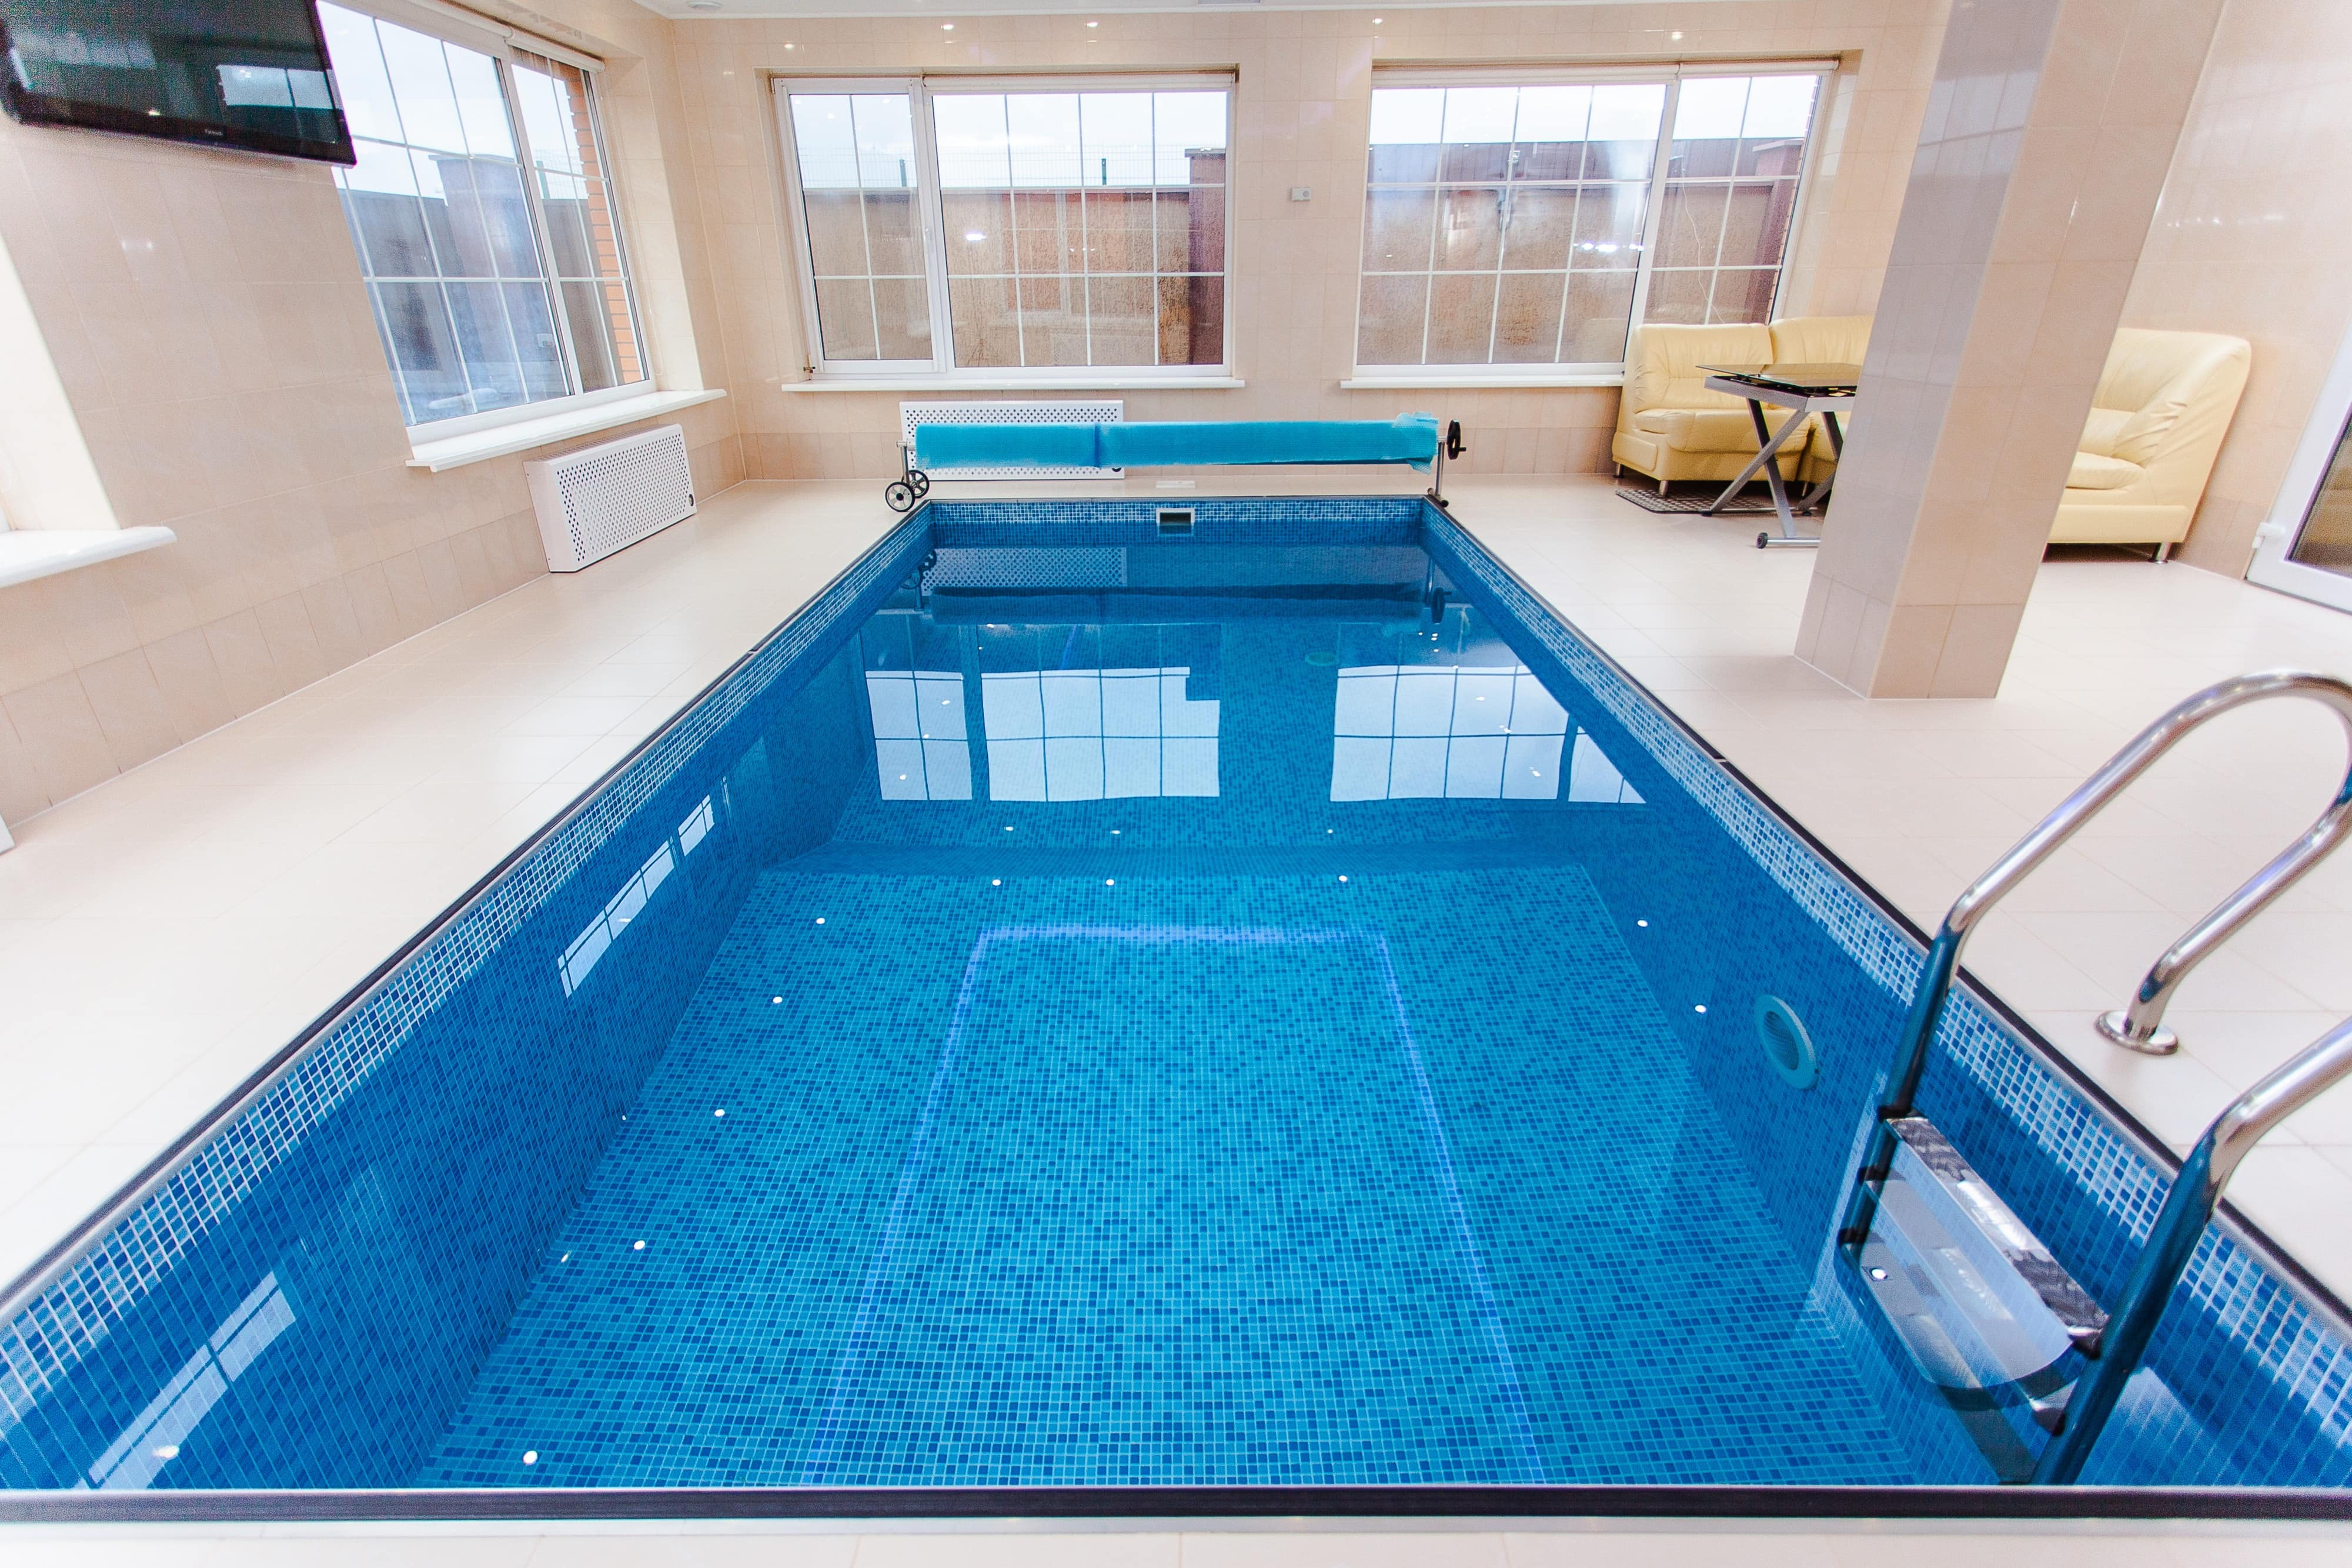 The whole family can enjoy holiday homes with swimming pools in the UK